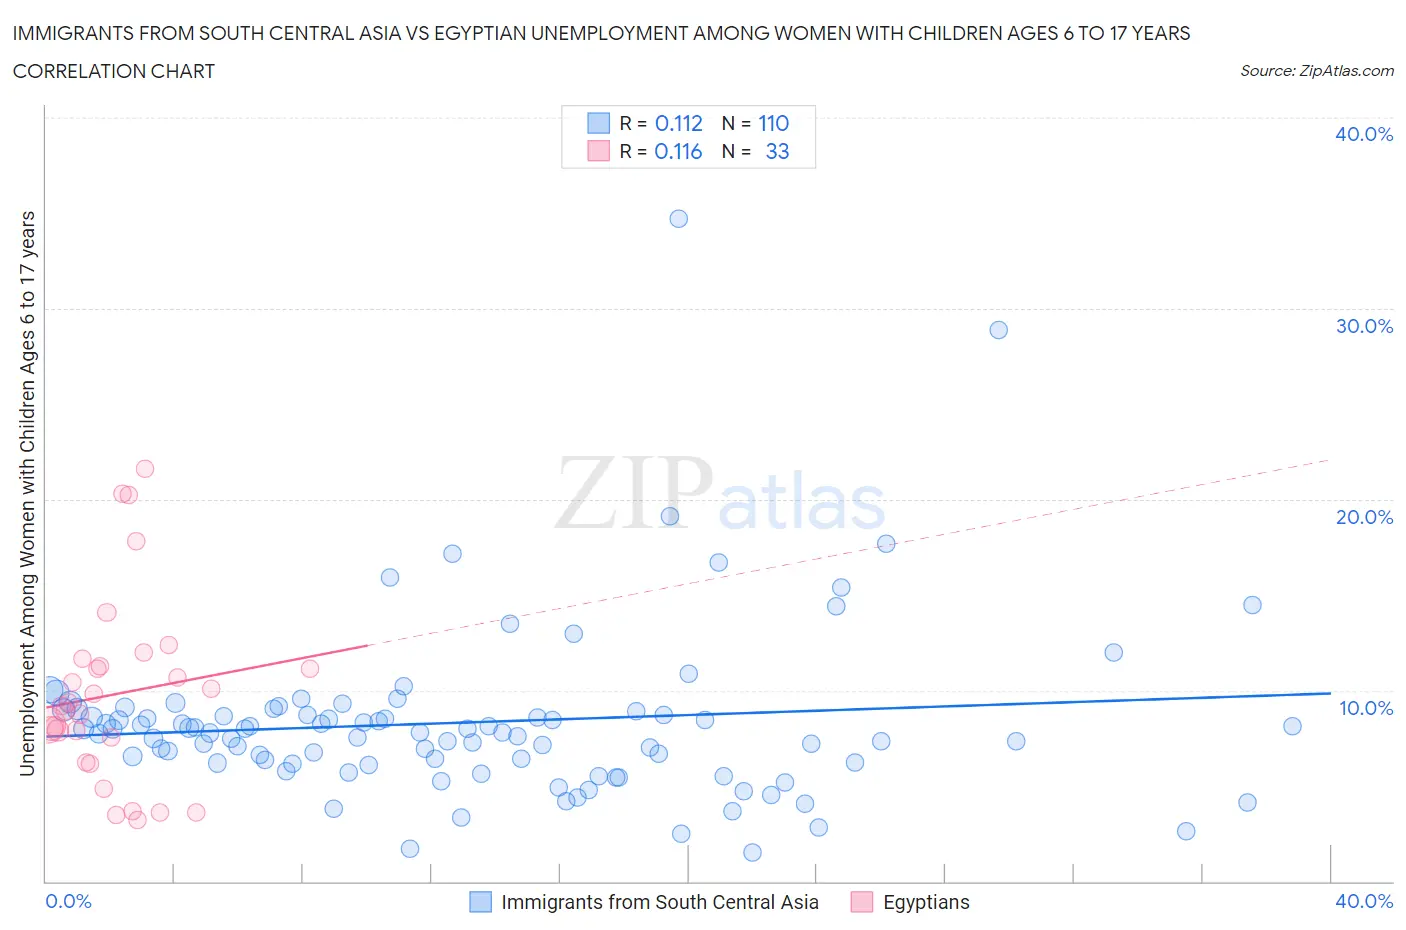 Immigrants from South Central Asia vs Egyptian Unemployment Among Women with Children Ages 6 to 17 years